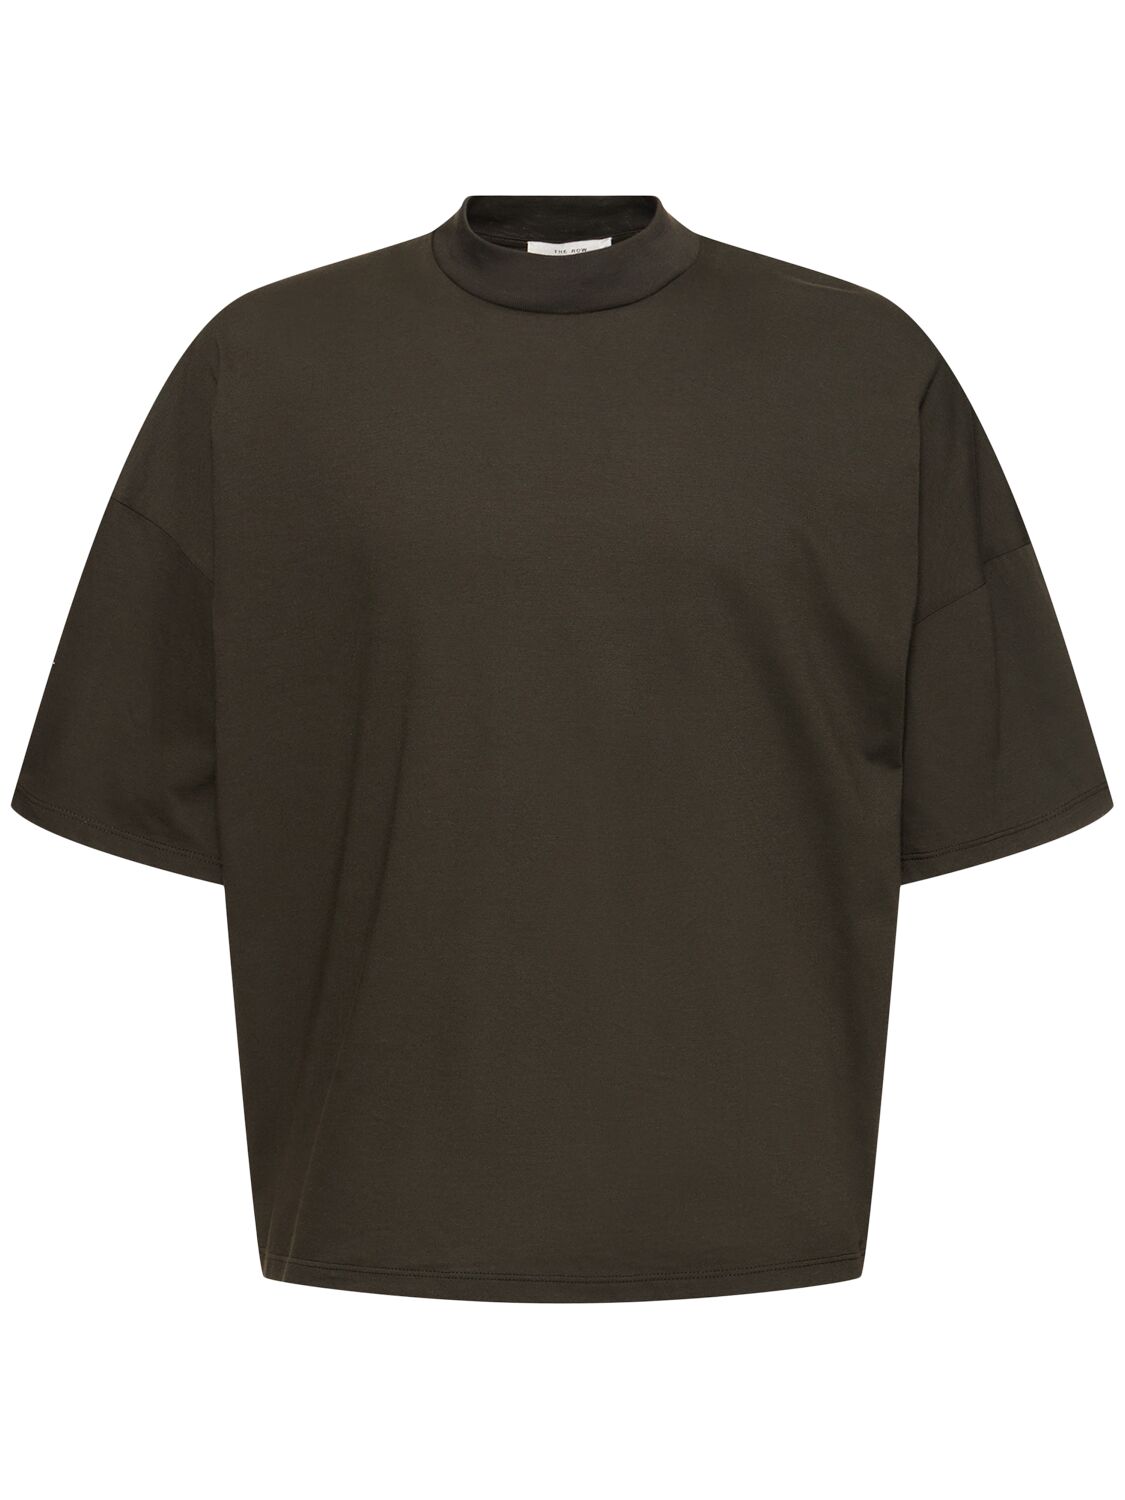 Shop The Row Dustin Cotton Jersey T-shirt In Dovetail